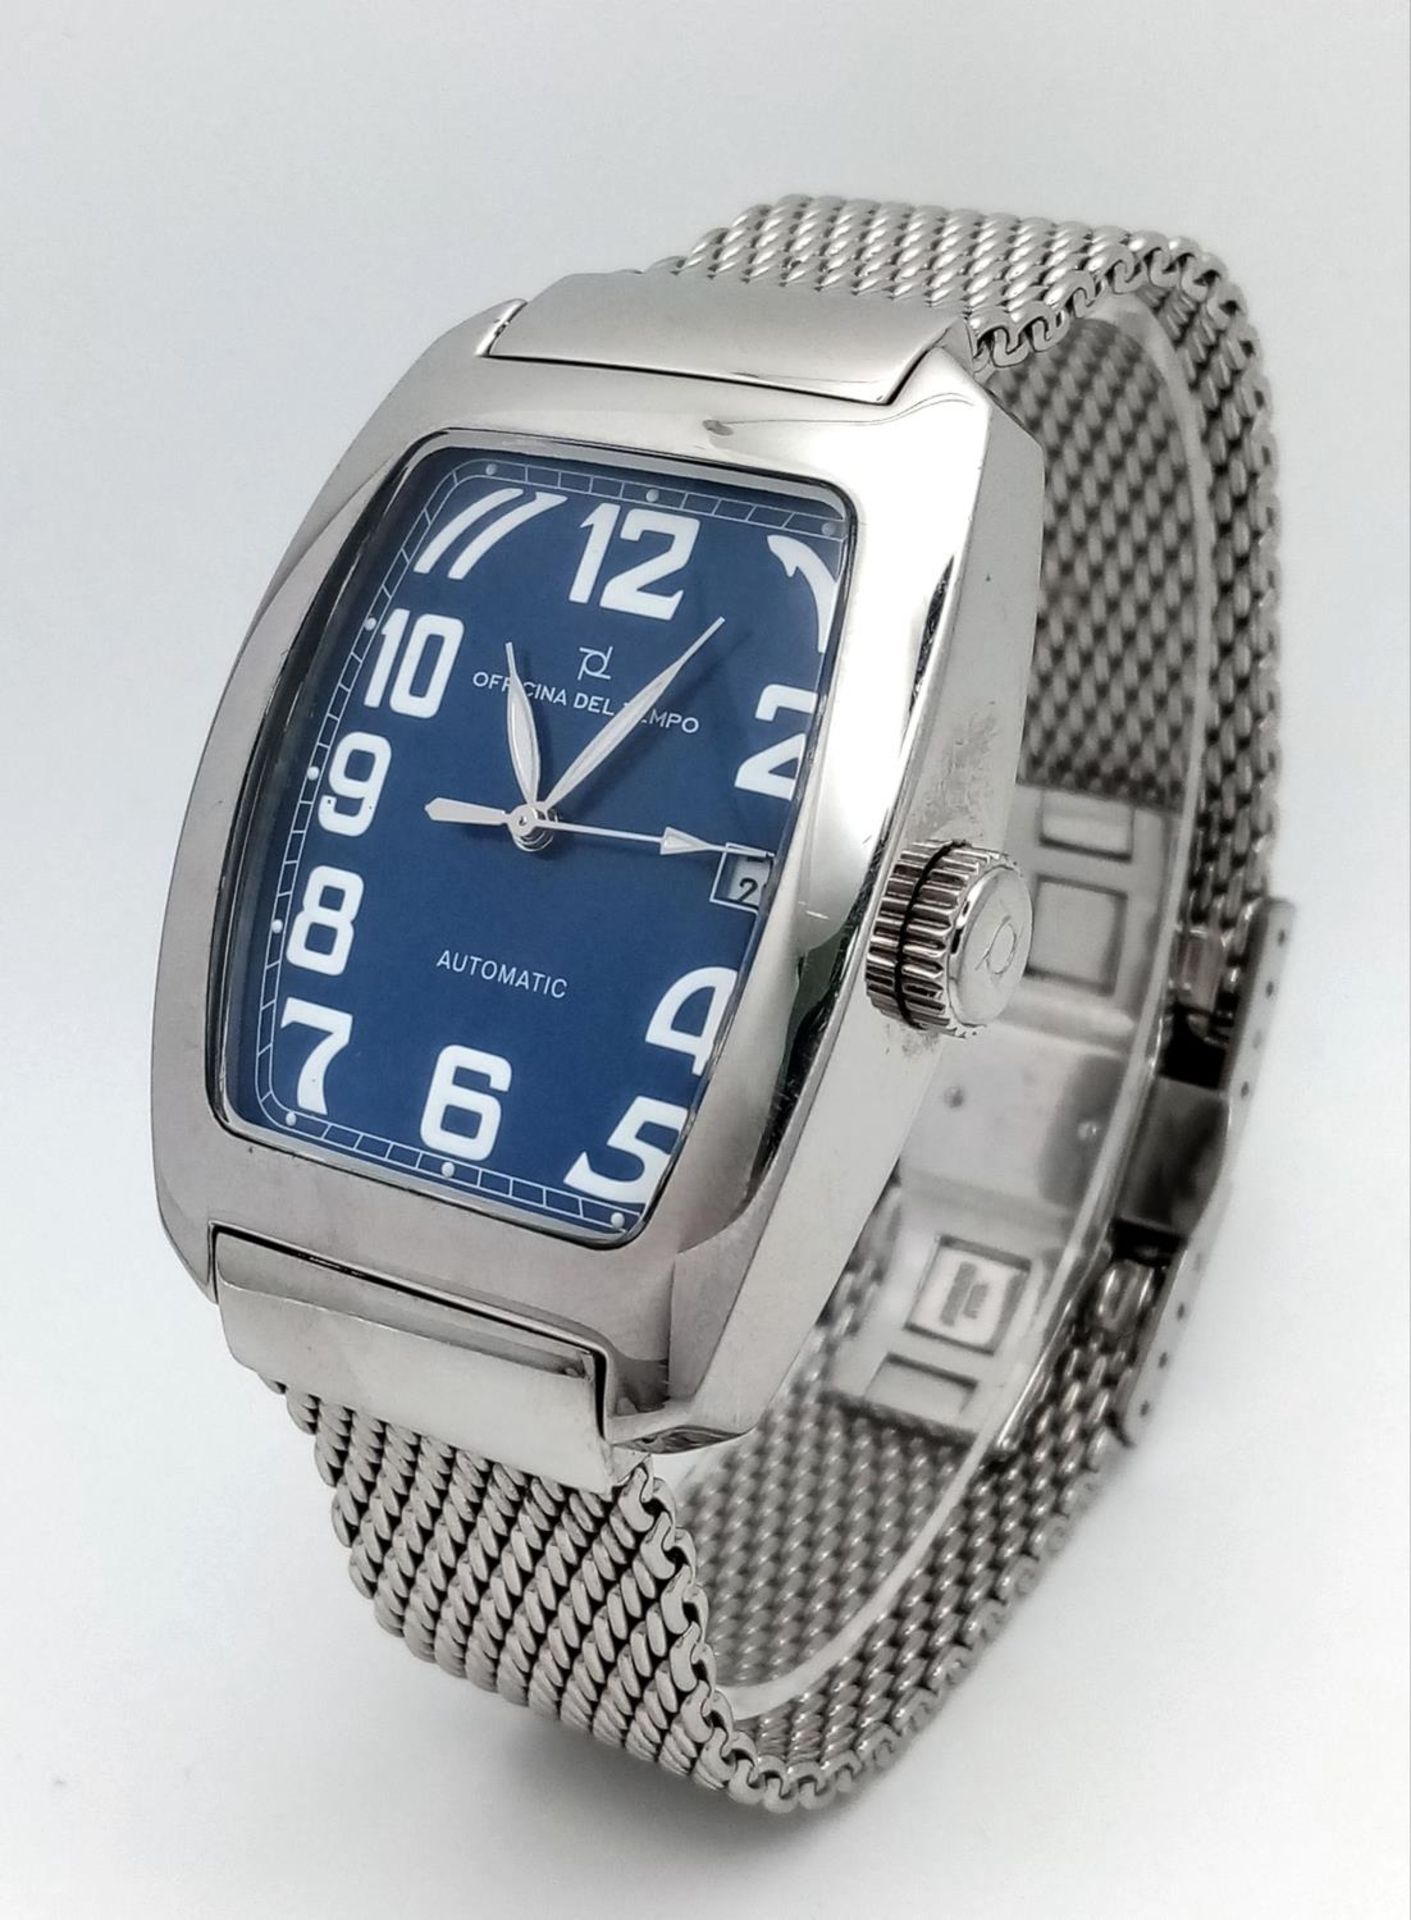 An Officina Del Tempo Automatic Gents Watch. Stainless steel bracelet and case - 38mm. Blue dial